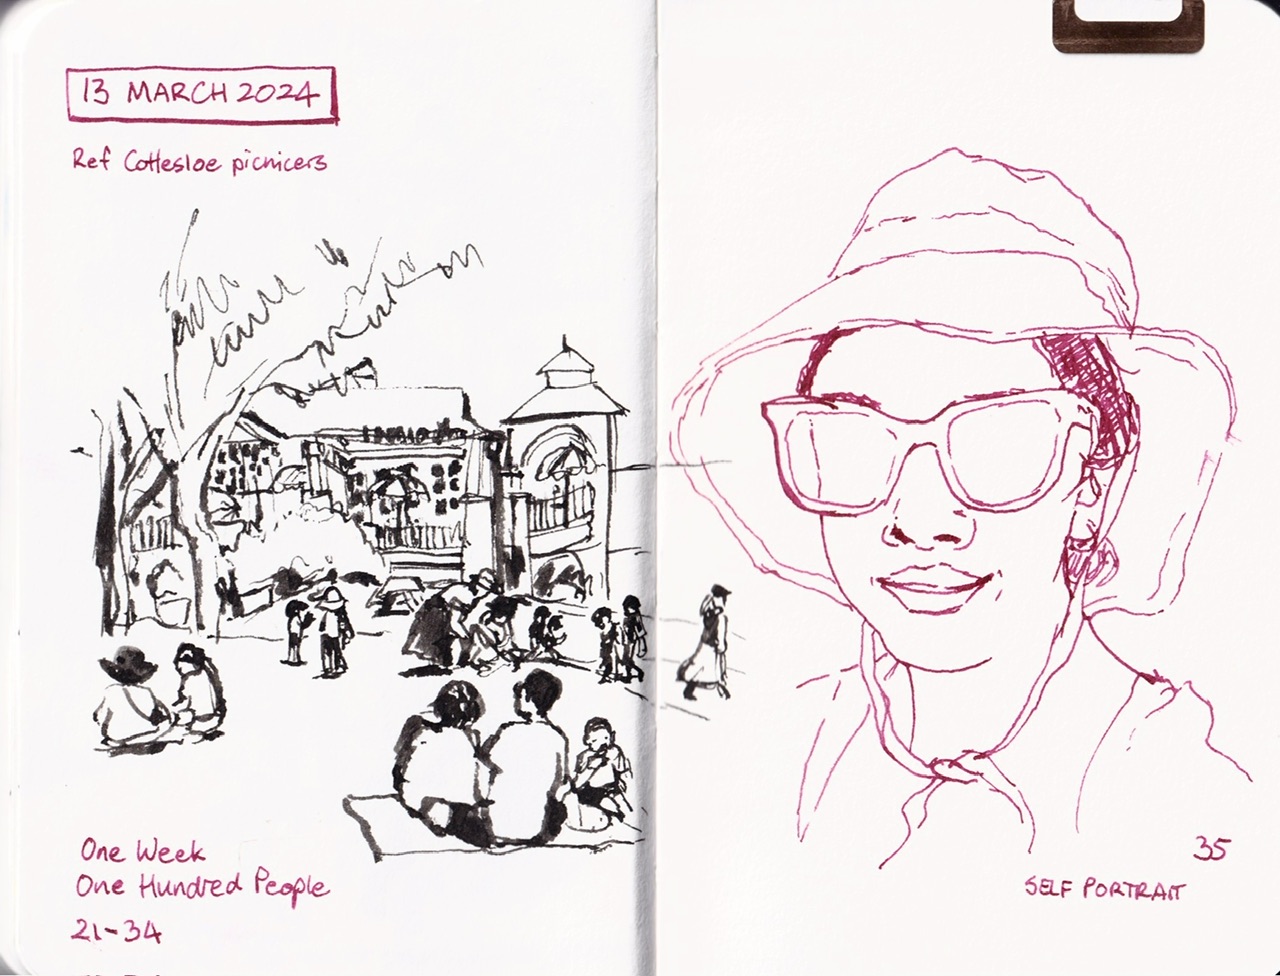 sketchbook 6 22.jpeg|Pen sketches of a crowd at the beach, self-portrait in magenta ink